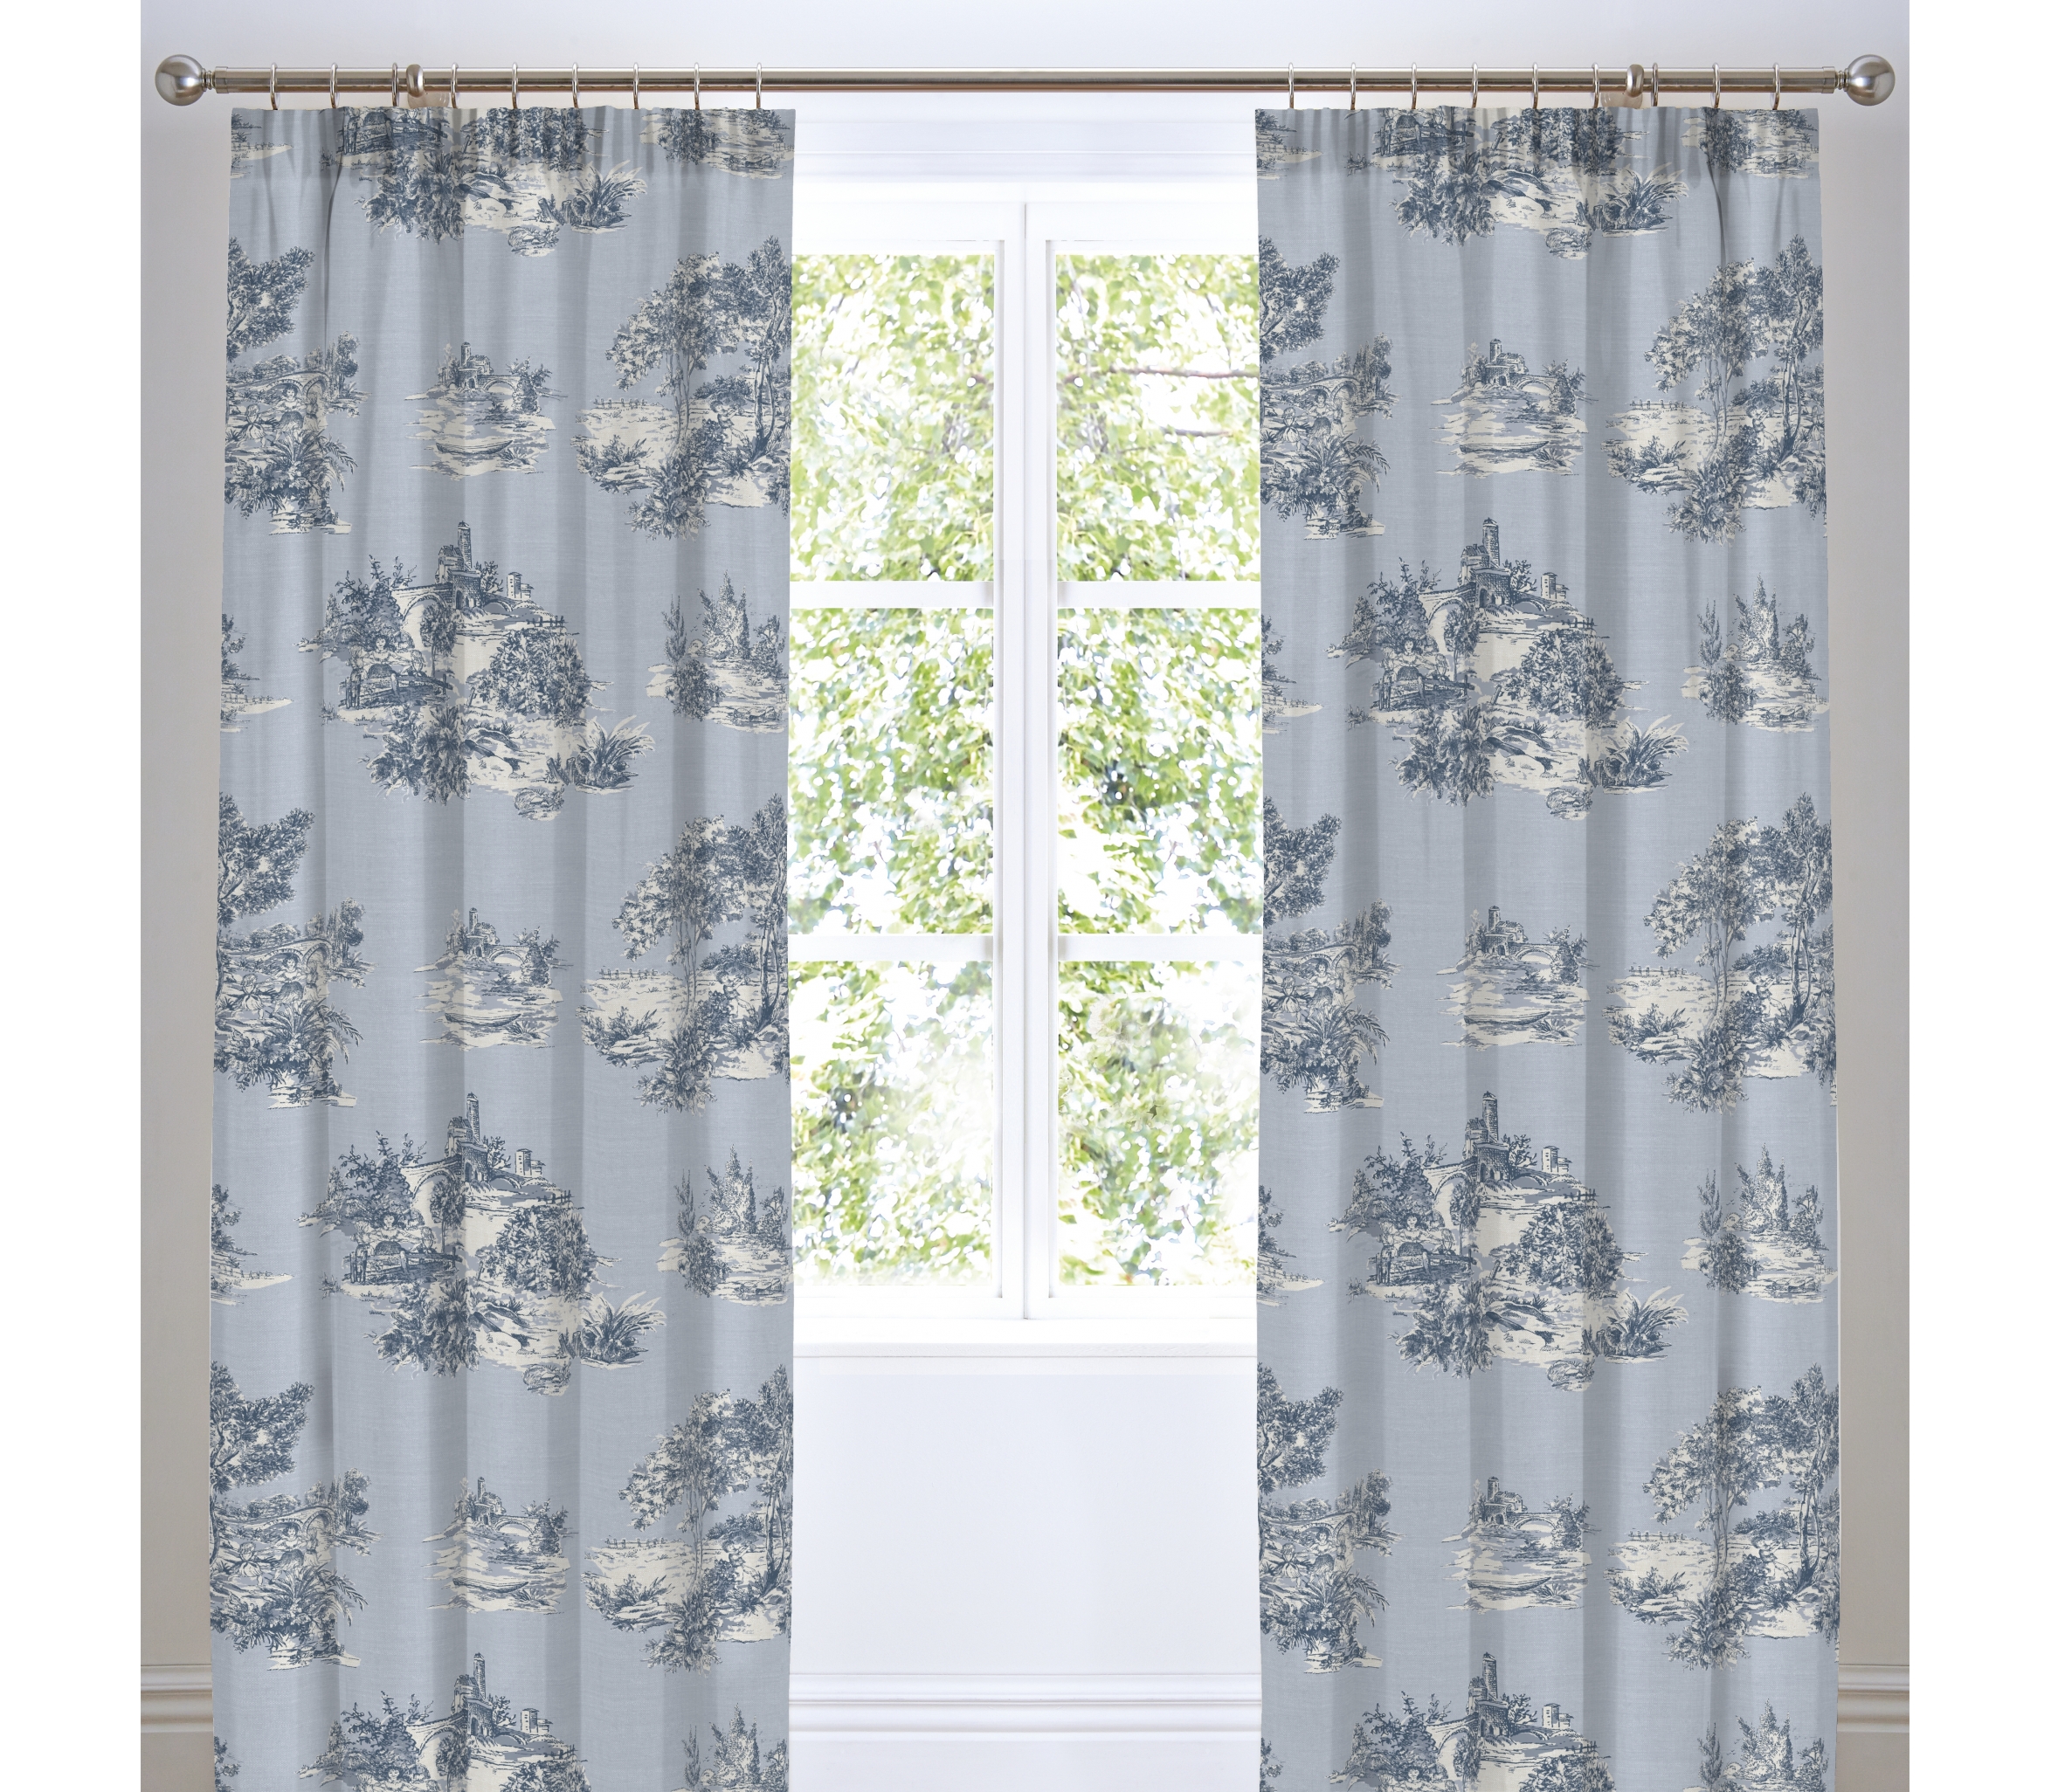 Dreams &-Drapes - Country Toile- Blue Curtains | J Rosenthal & Son